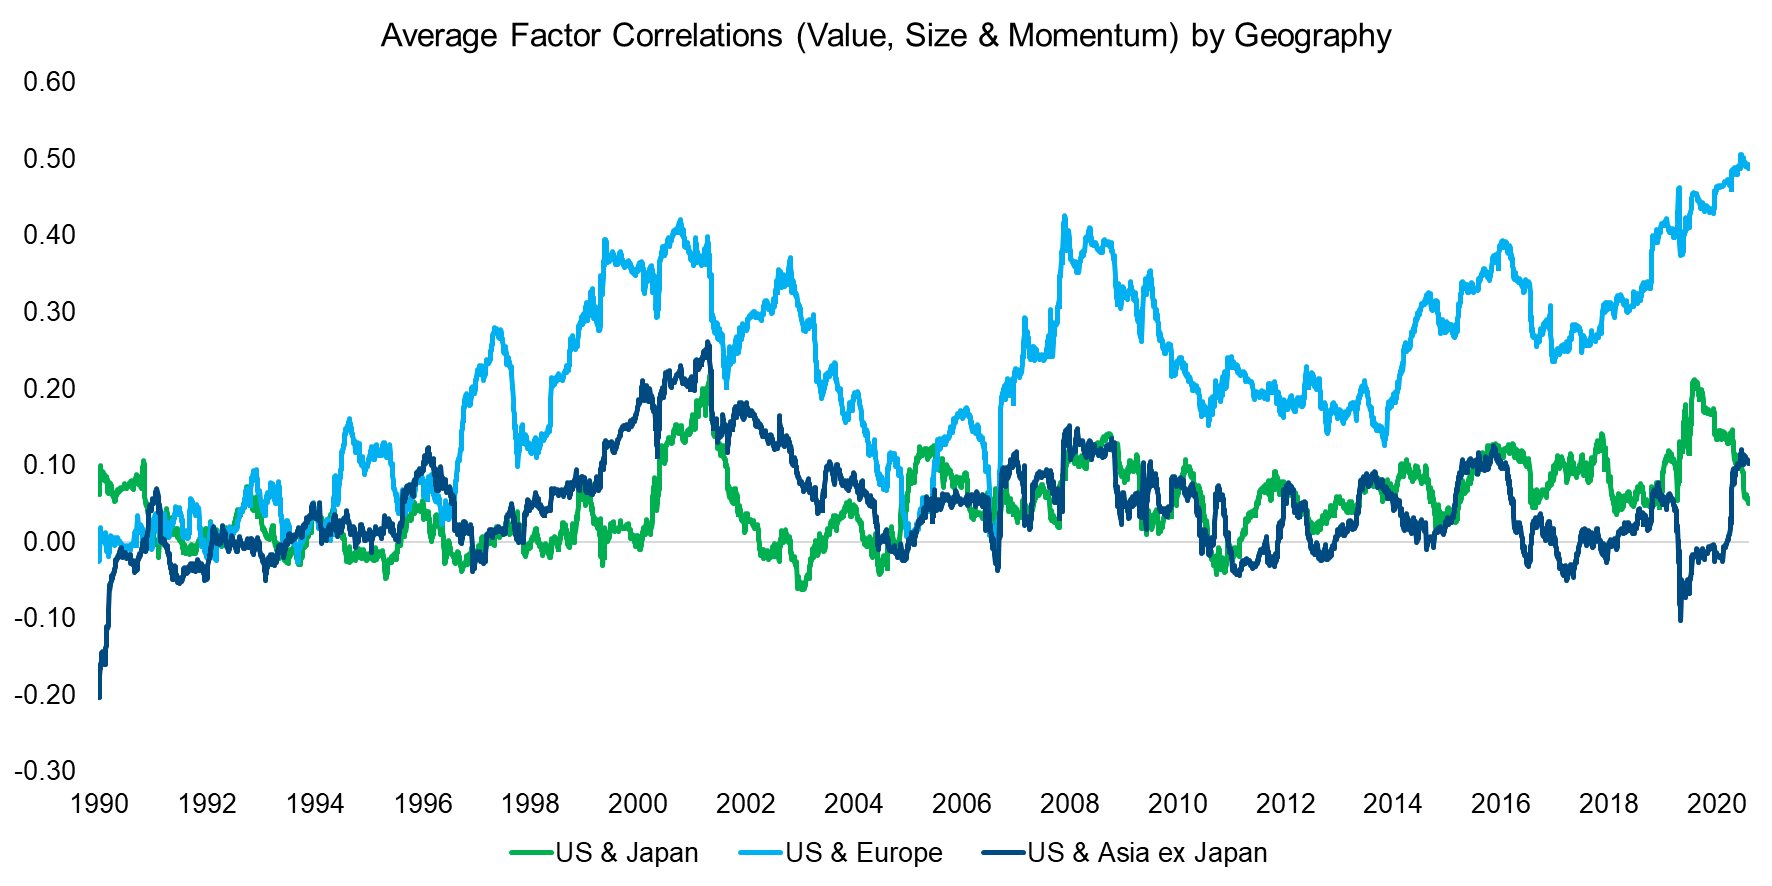 Average Factor Correlations (Value, Size & Momentum) by Geography